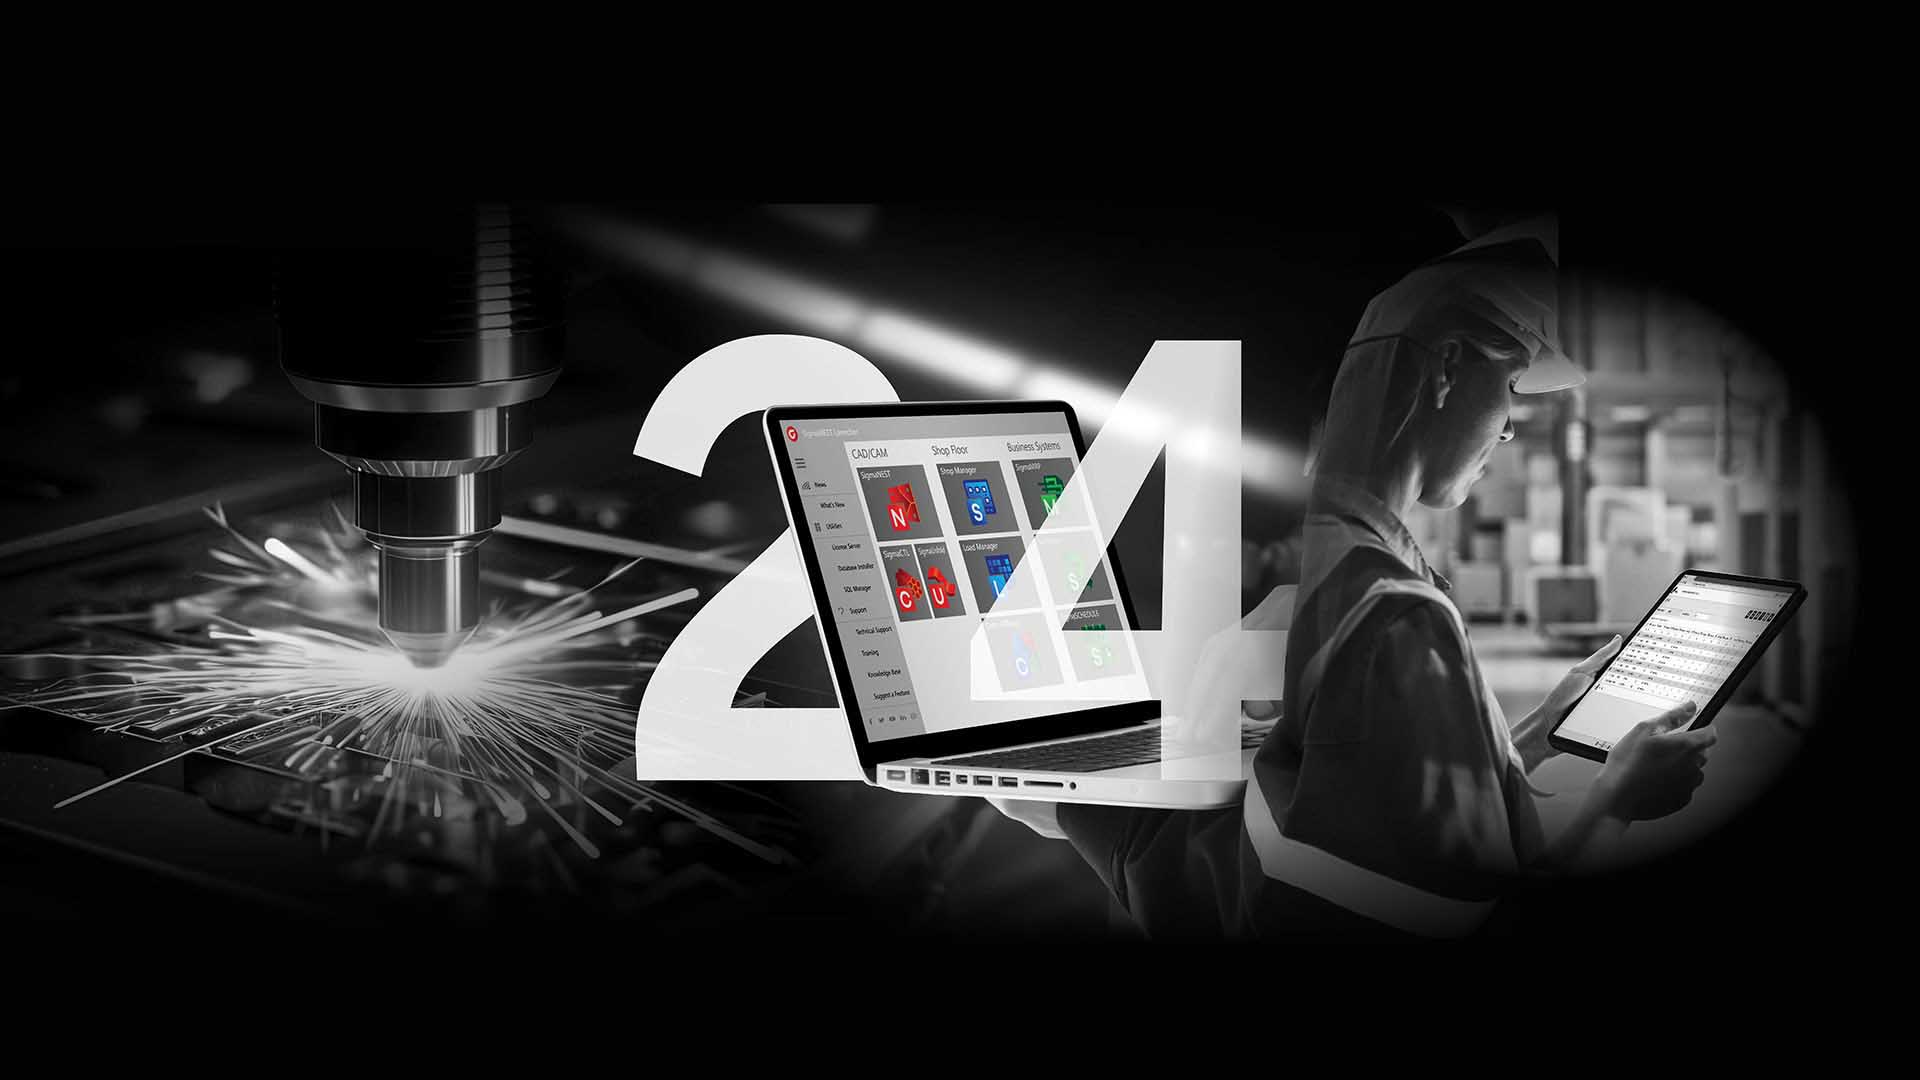 SigmaNEST 24 Suite Connects CAD/CAM, Shop Floor and Business Systems